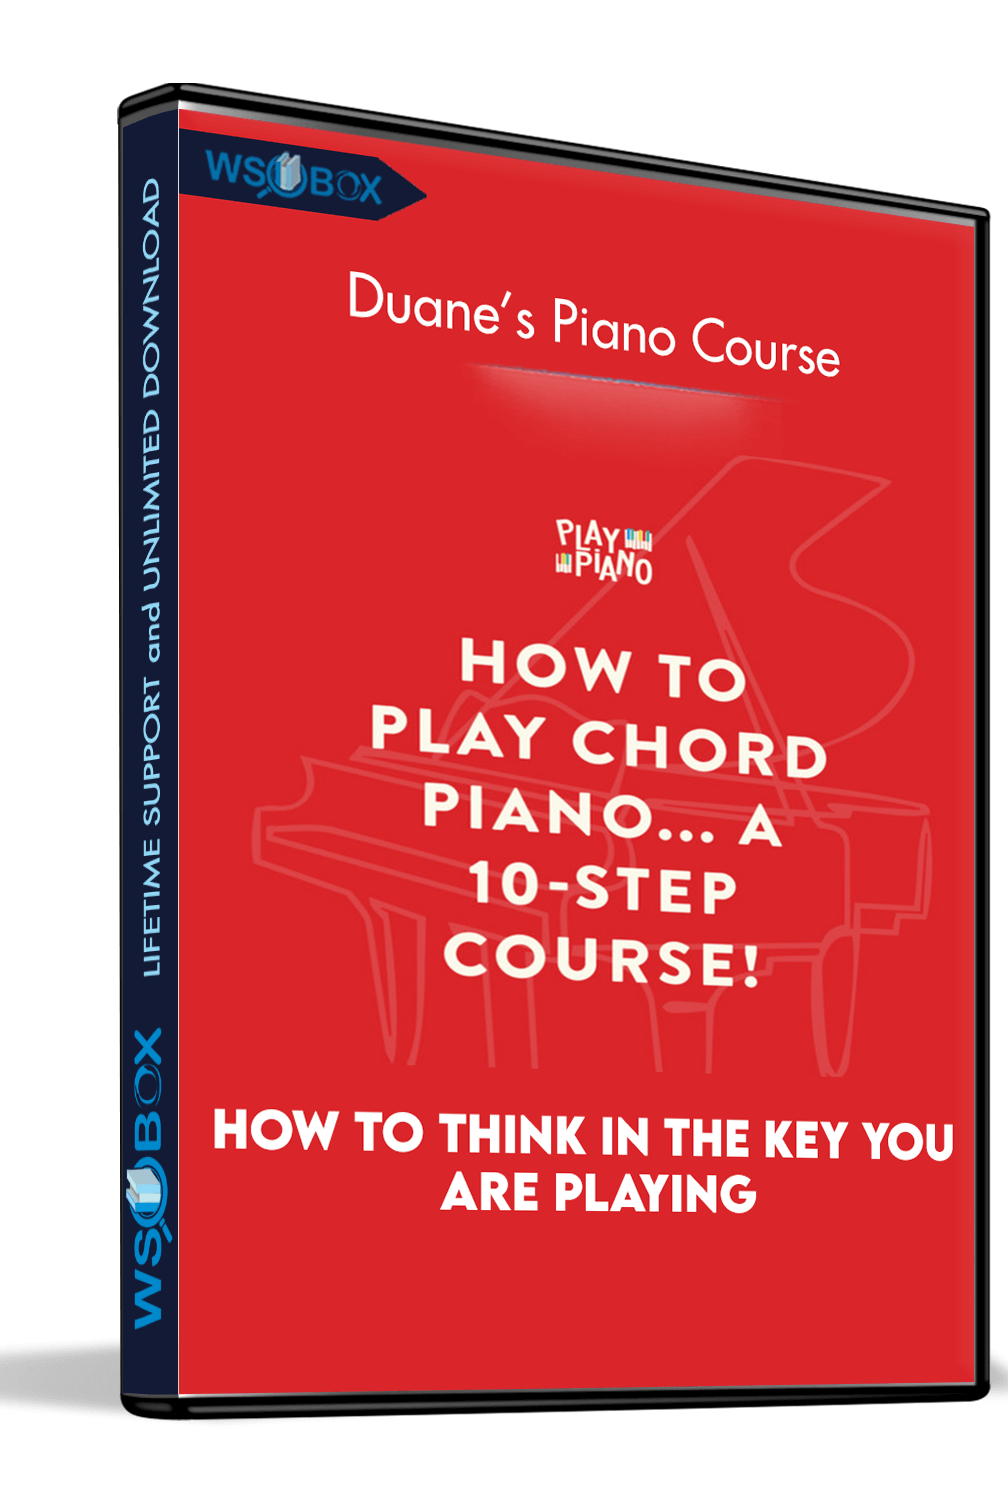 How to Think In The Key You are Playing – Duane’s Piano Course